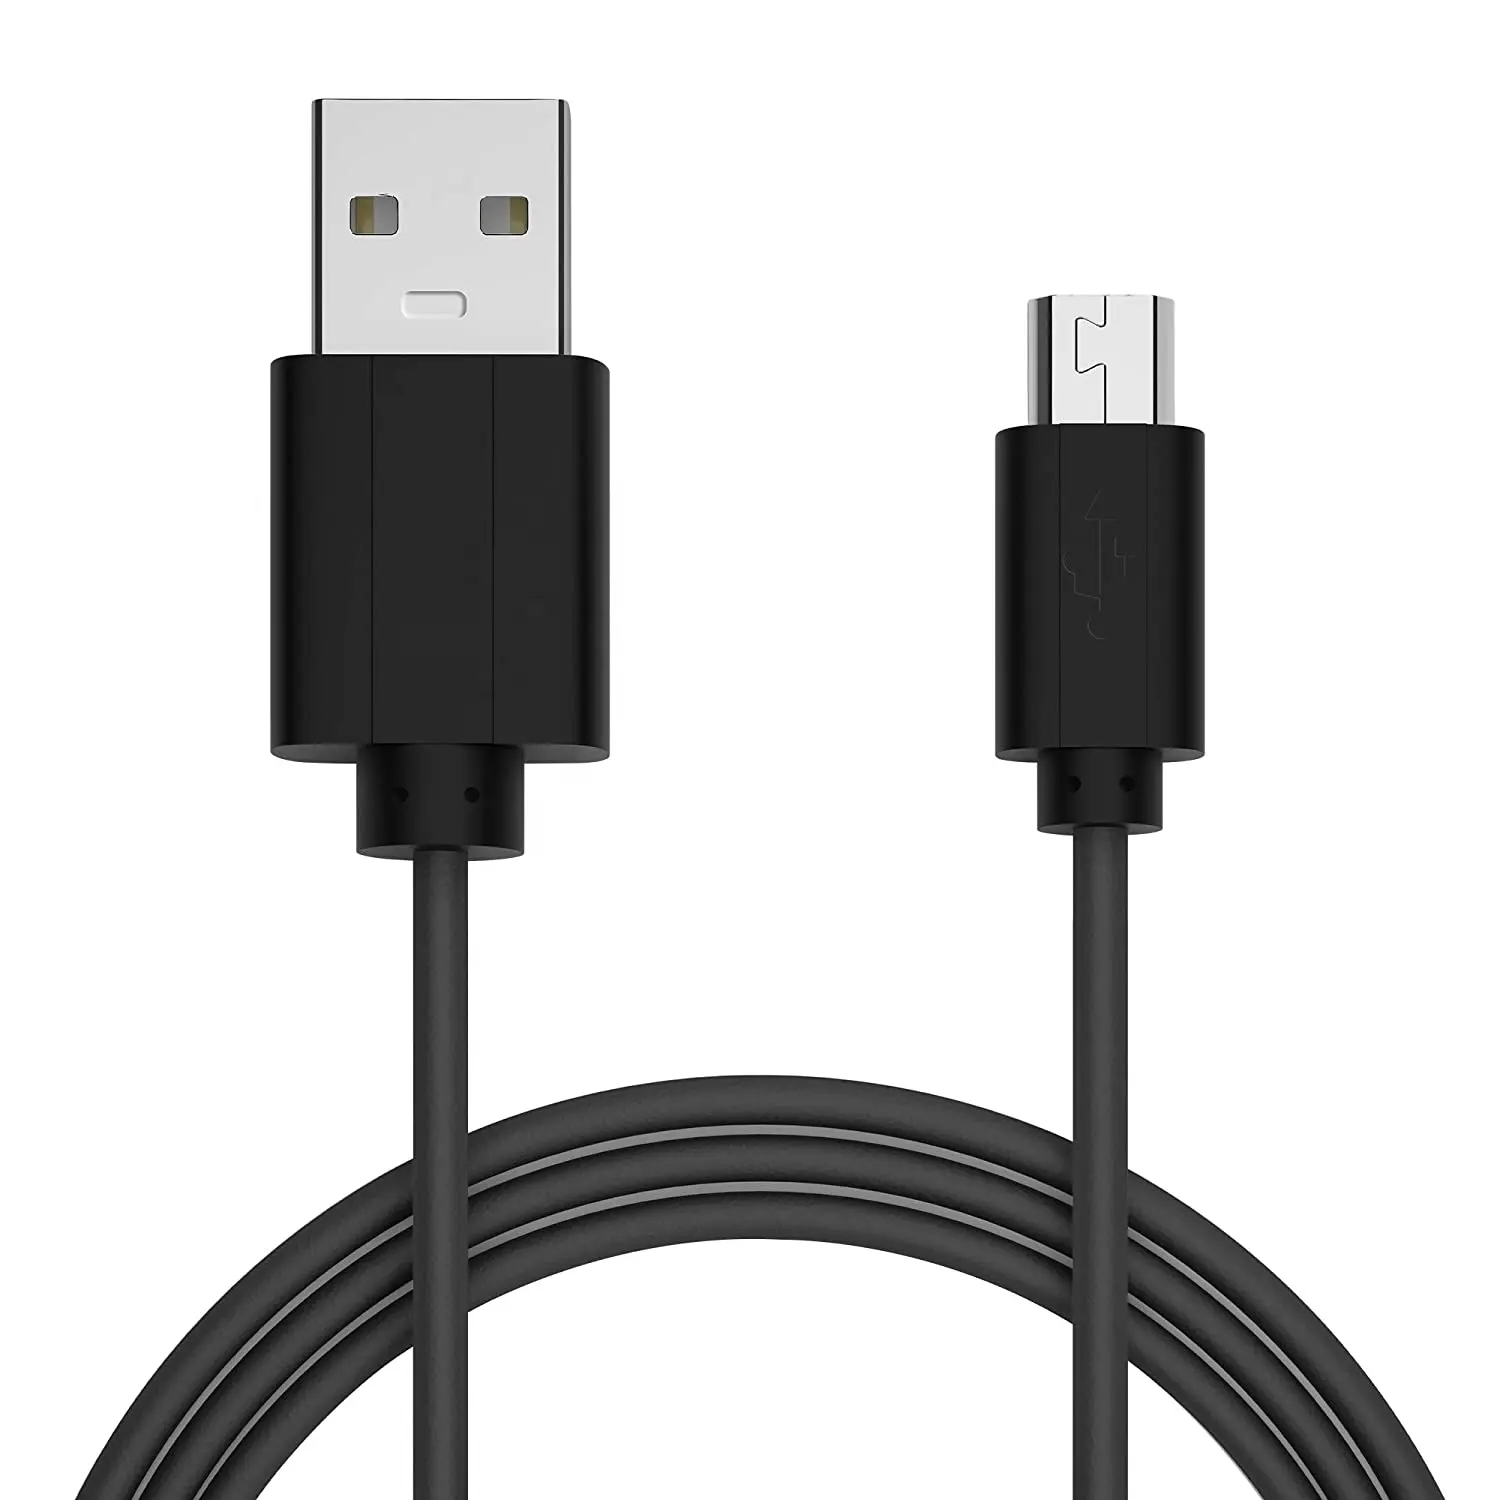 Micro to USB 2.0 Round Cable with High Speed Charging, Quick Data Sync, PVC Connector for All USB Powered Devices, Tablet